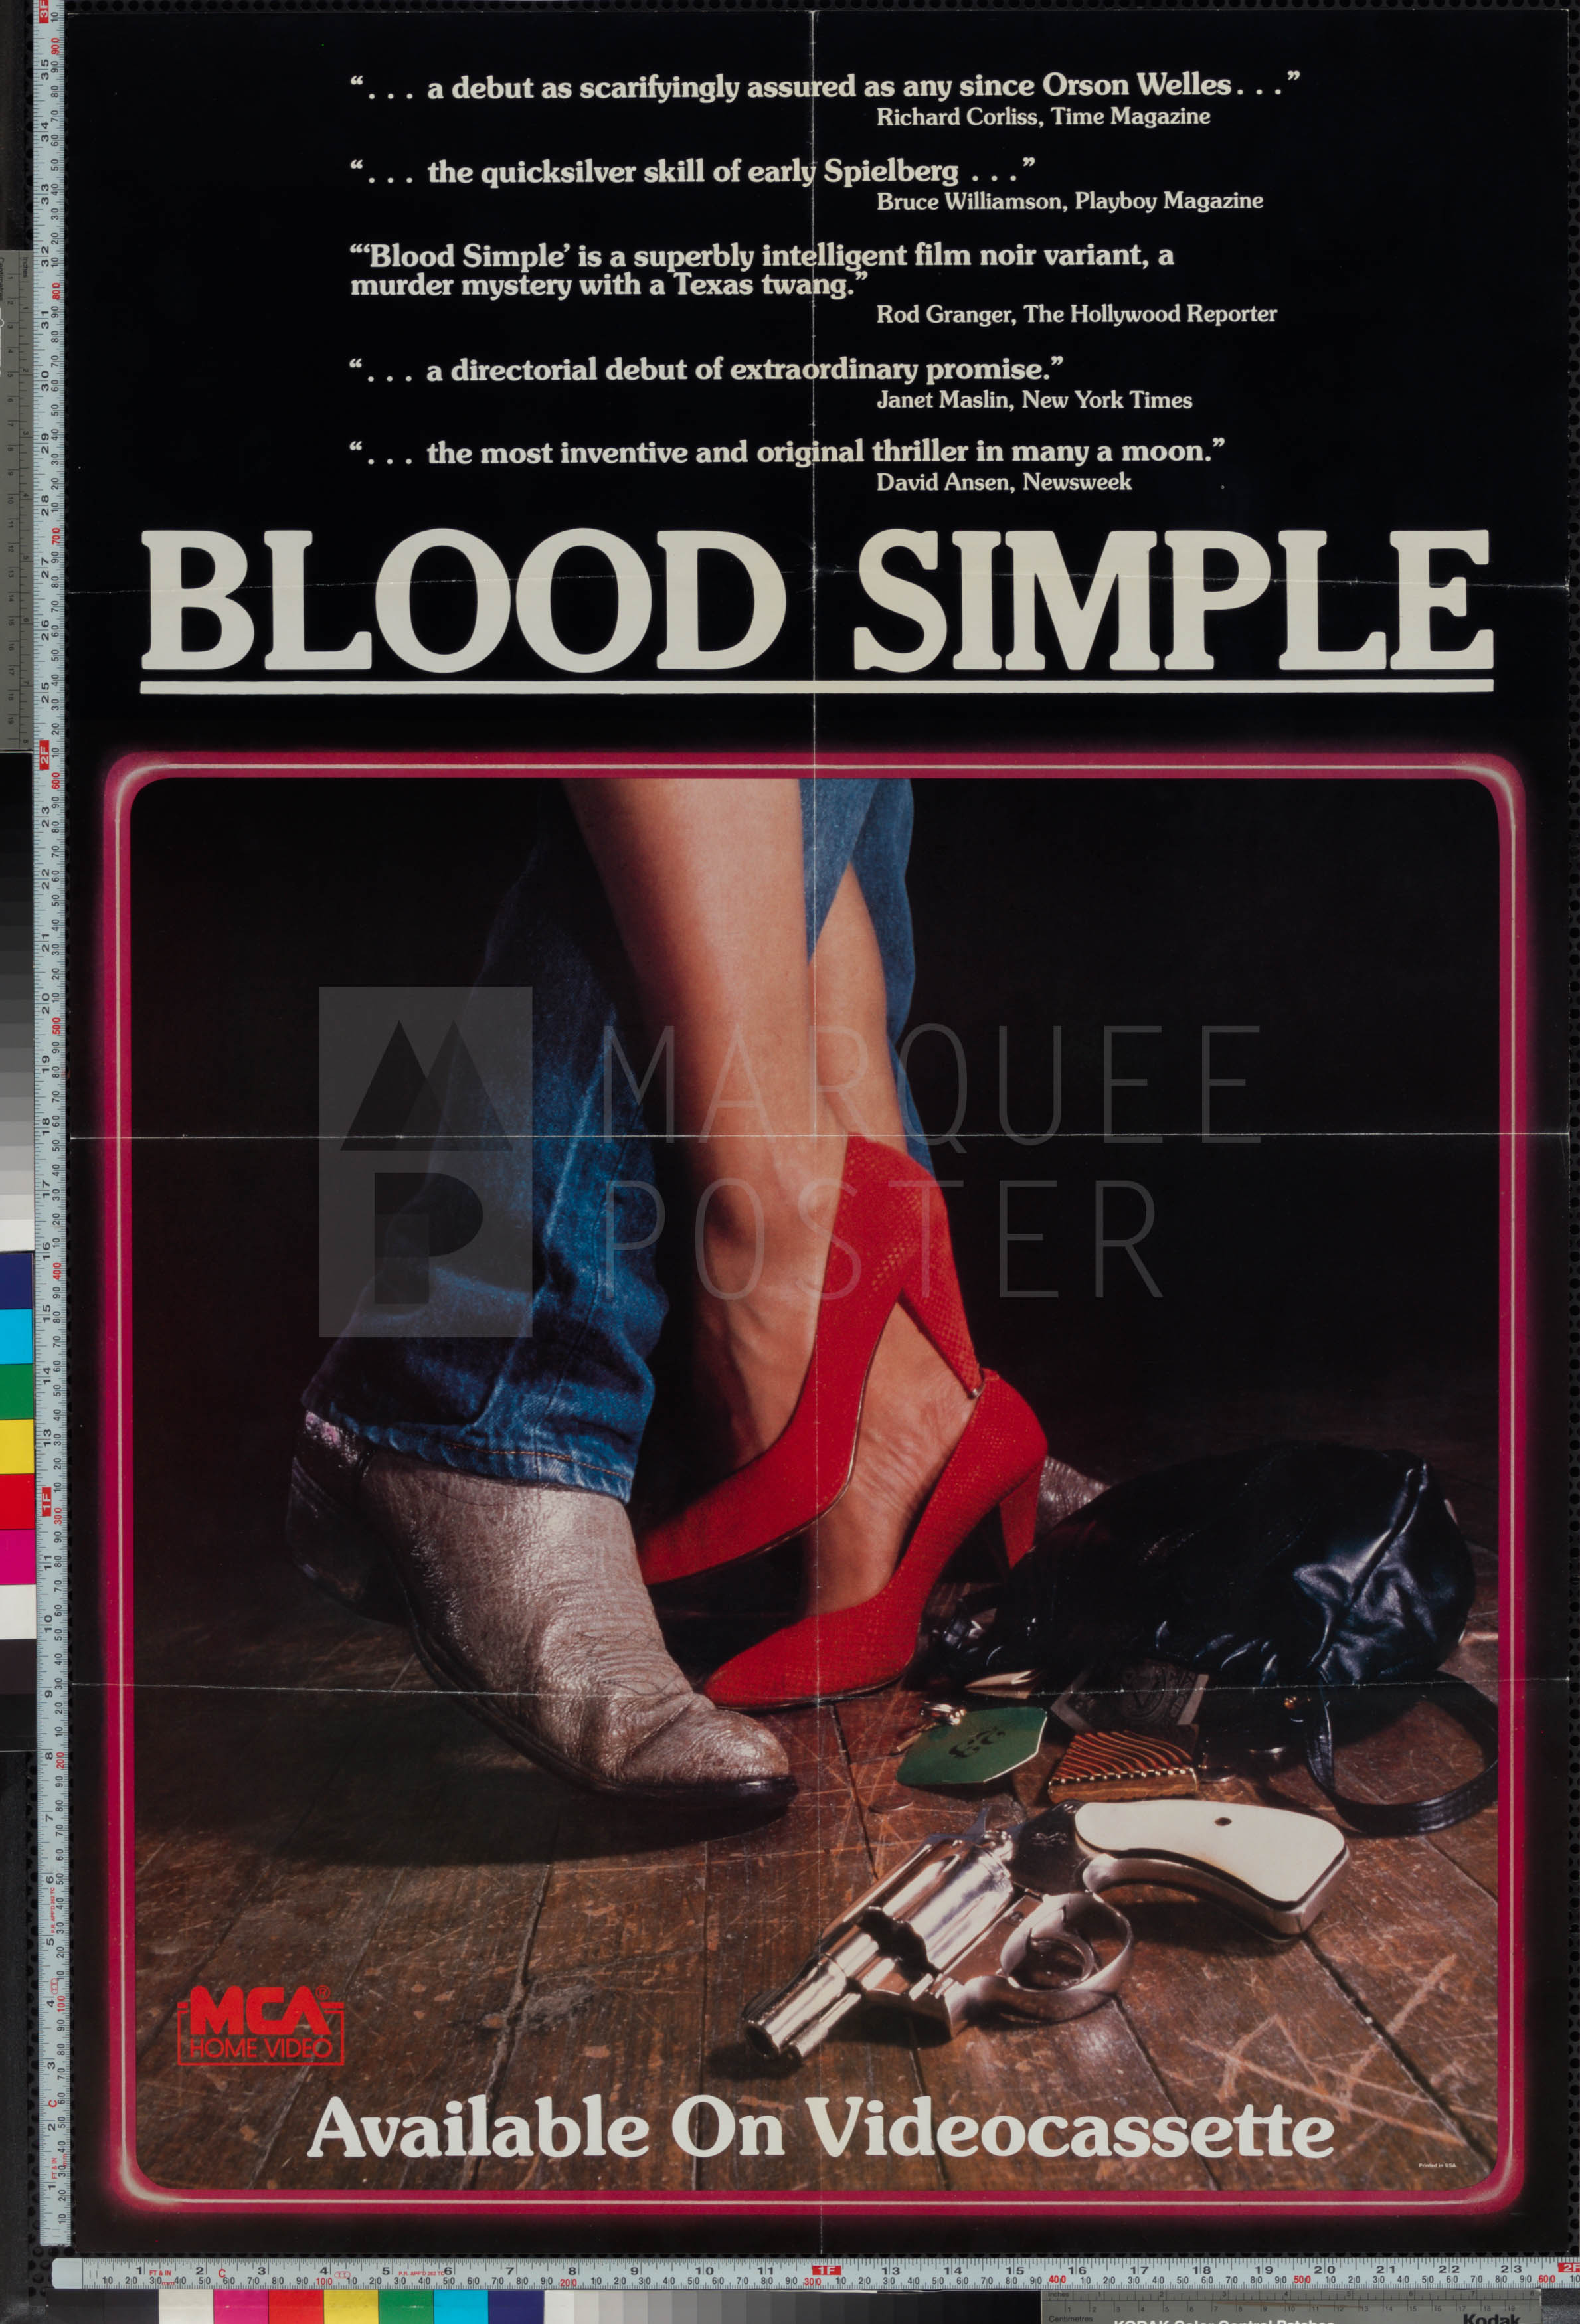 79-blood-simple-video-us-arch-d-1980s-02